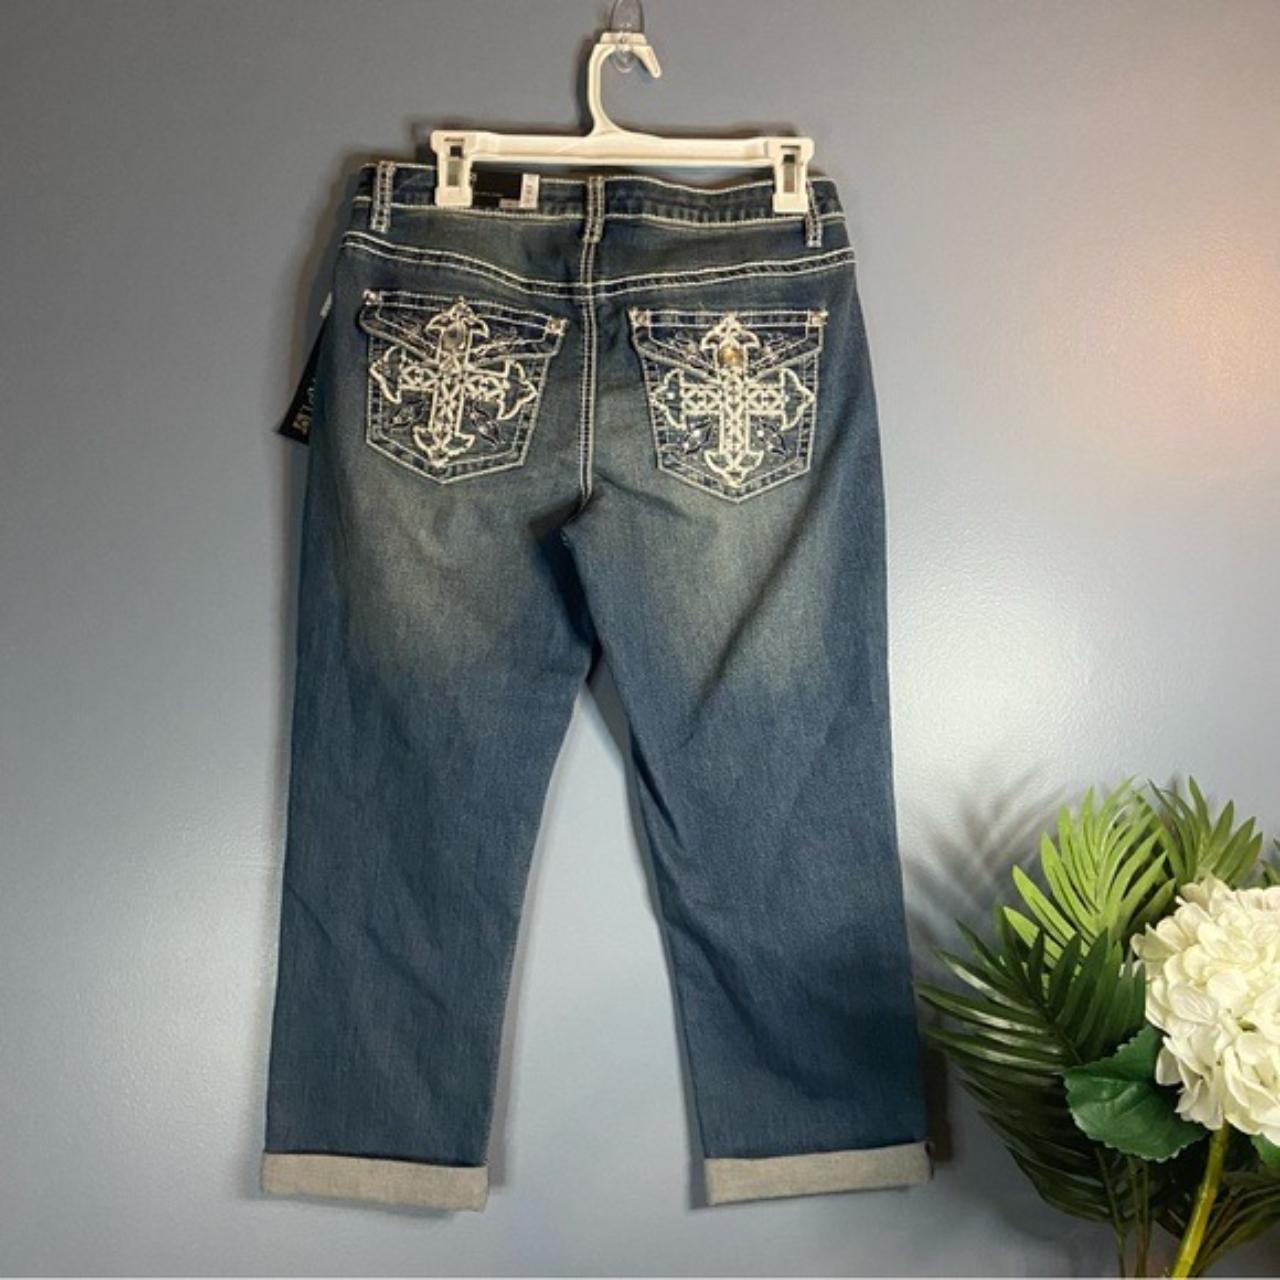 Apt 9 Jean Bootcut Mid Rise Straight Hip Thigh Heavily Embellished